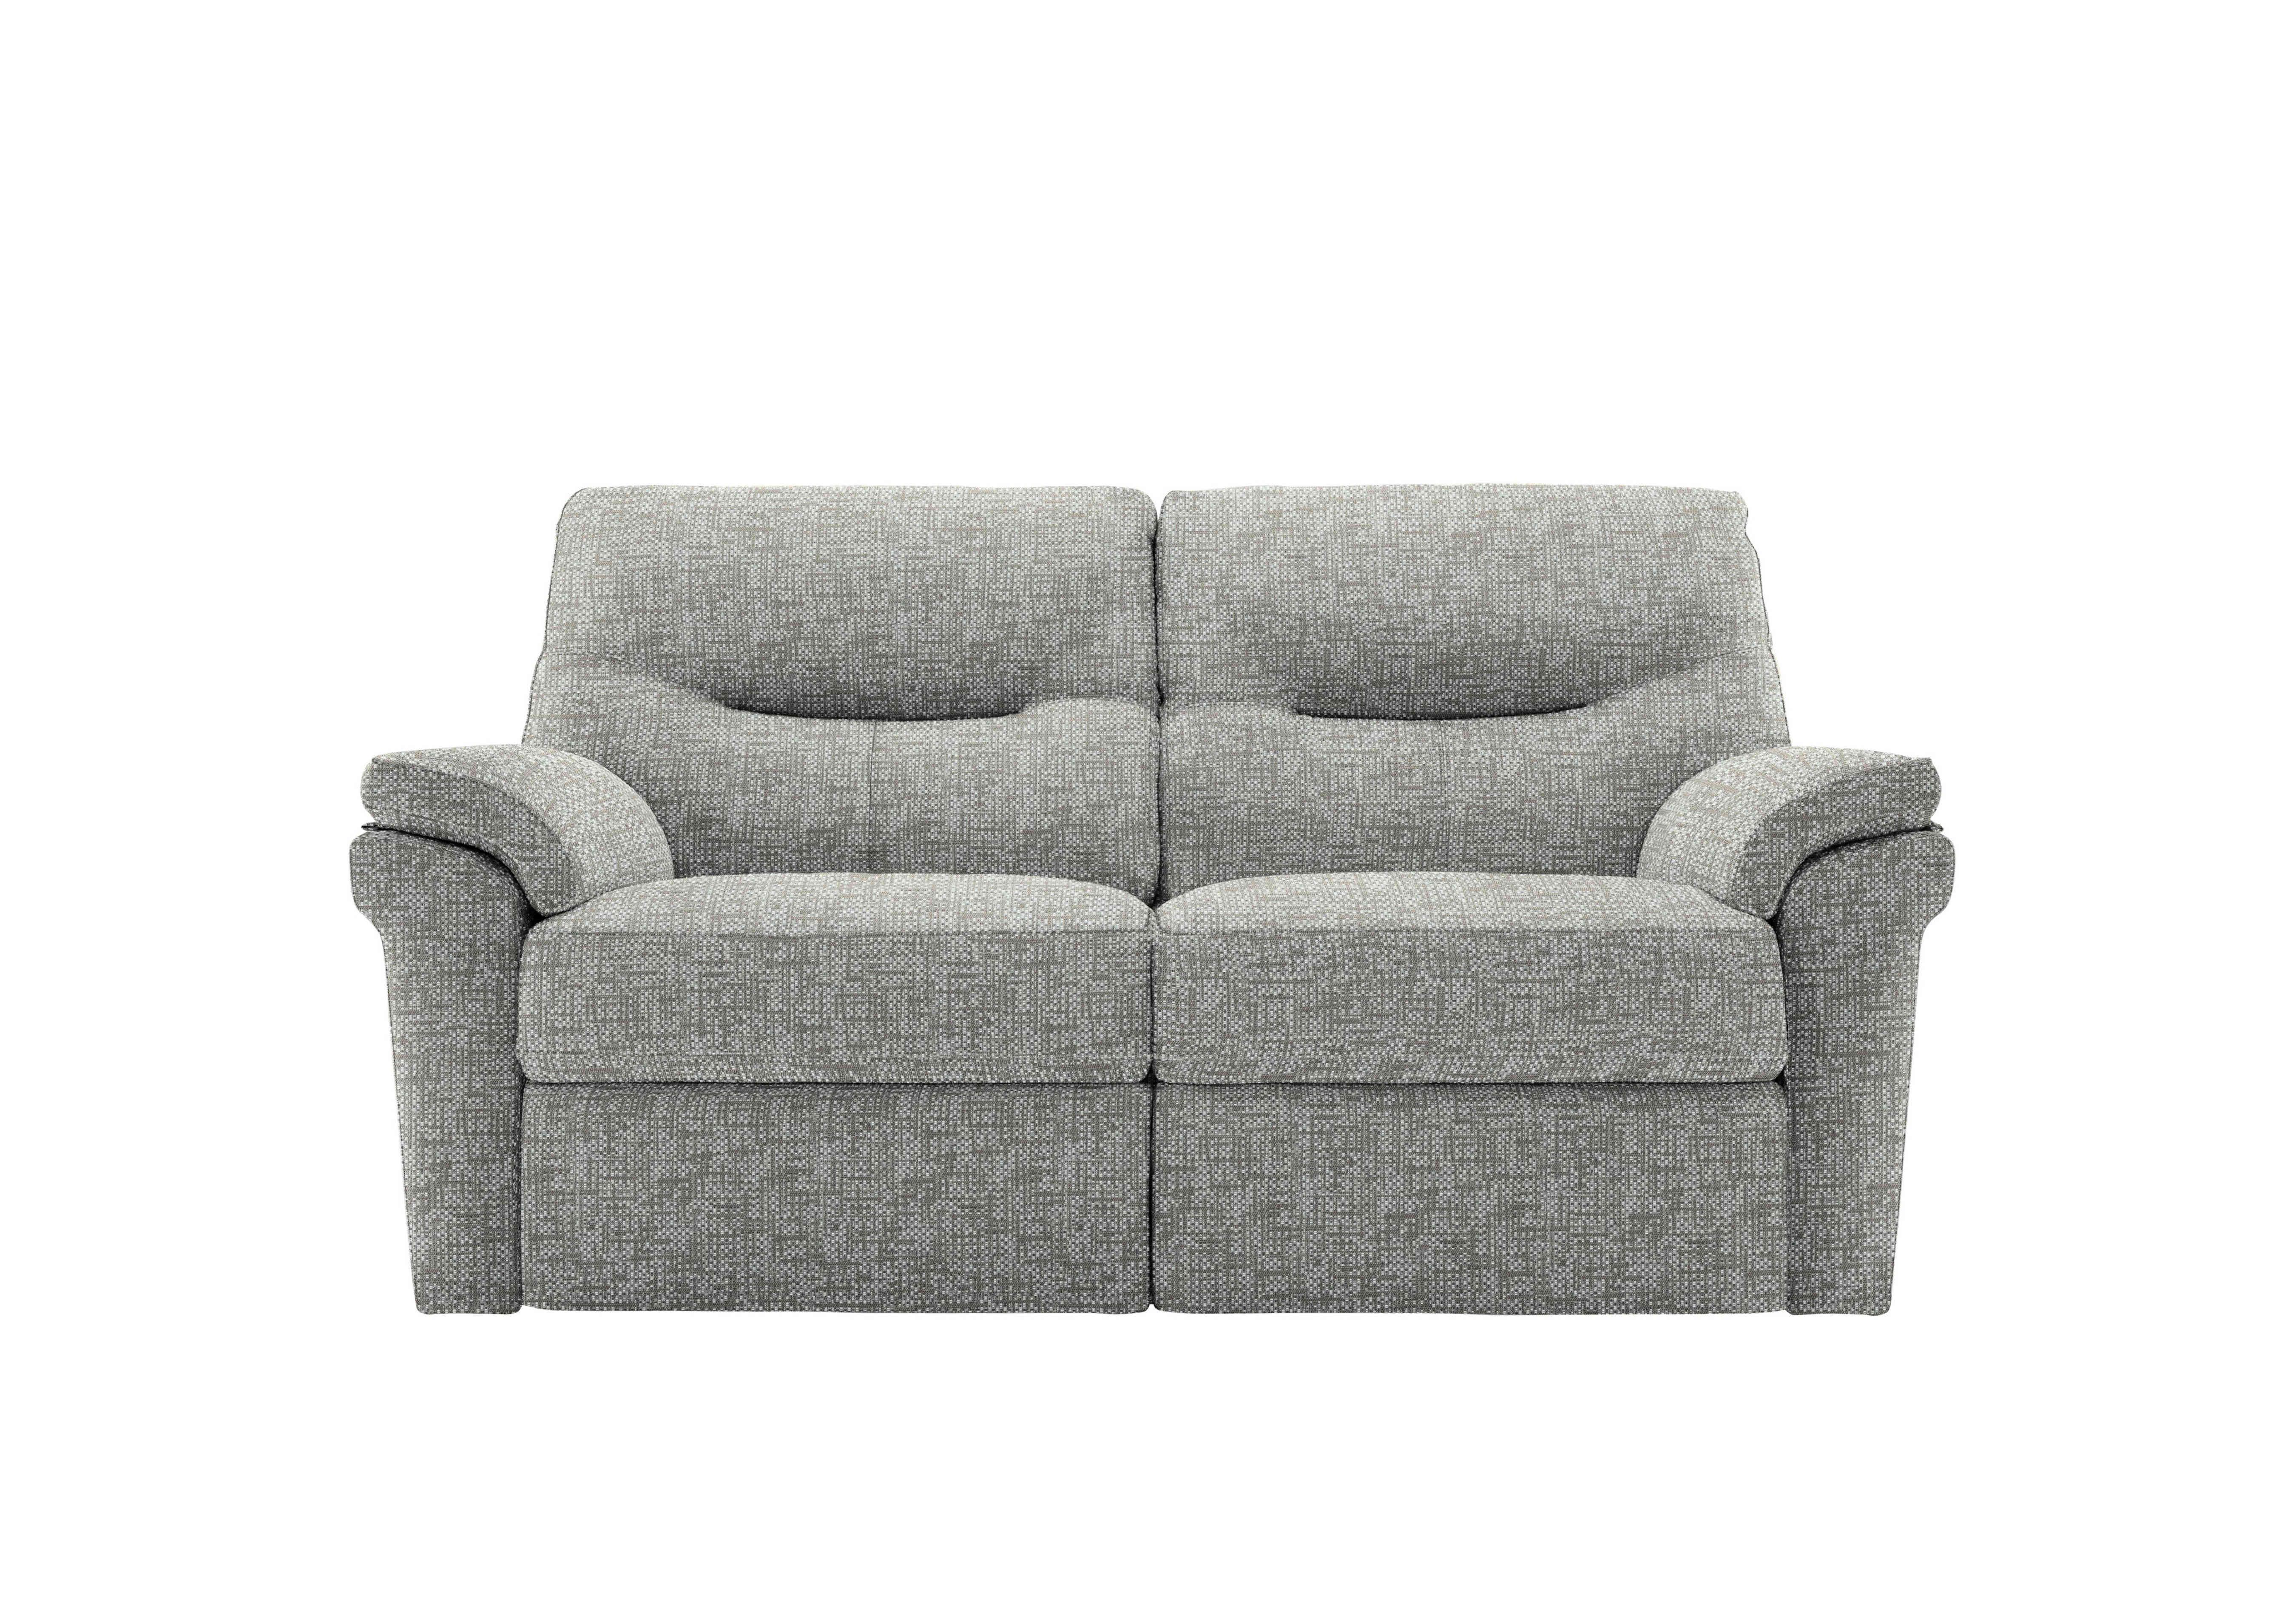 Seattle 2 Seater Fabric Sofa in B032 Remco Duck Egg on Furniture Village